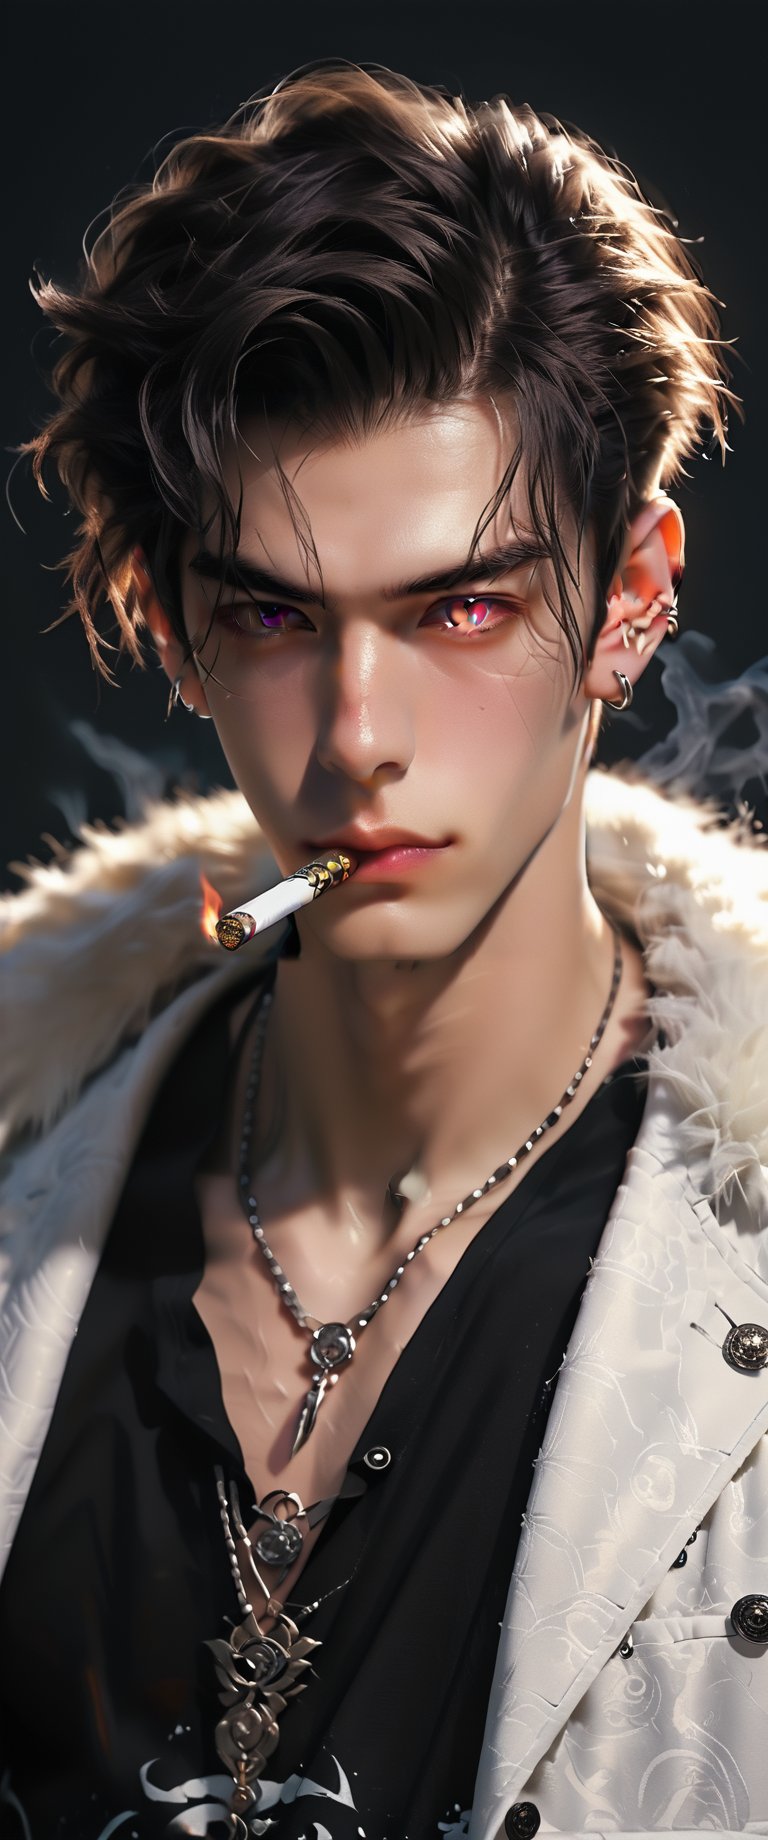 A solo male figure with short hair and piercing pink eyes looks directly at the viewer, dressed in a black shirt with a fur-trimmed jacket draped over his shoulders. He wears fingerless gloves and holds a katana sword across his body, its sheath partially visible beneath his white coat. A cigarette dangles from his mouth as he takes a slow drag, surrounded by a gradient background of deep blues that fade into wispy smoke. His gaze is intense, with a subtle smirk playing on his lips.